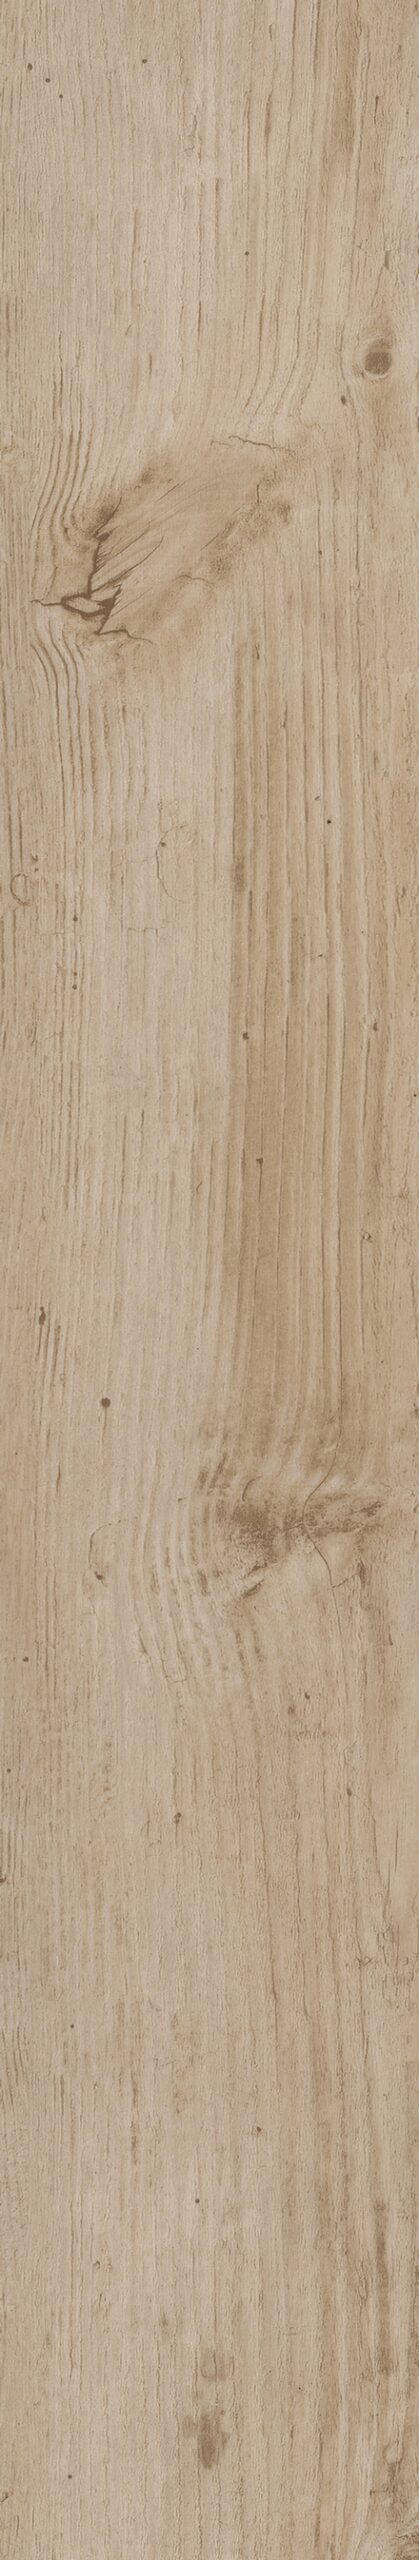 BLEACHED LARCH Floor Cladding